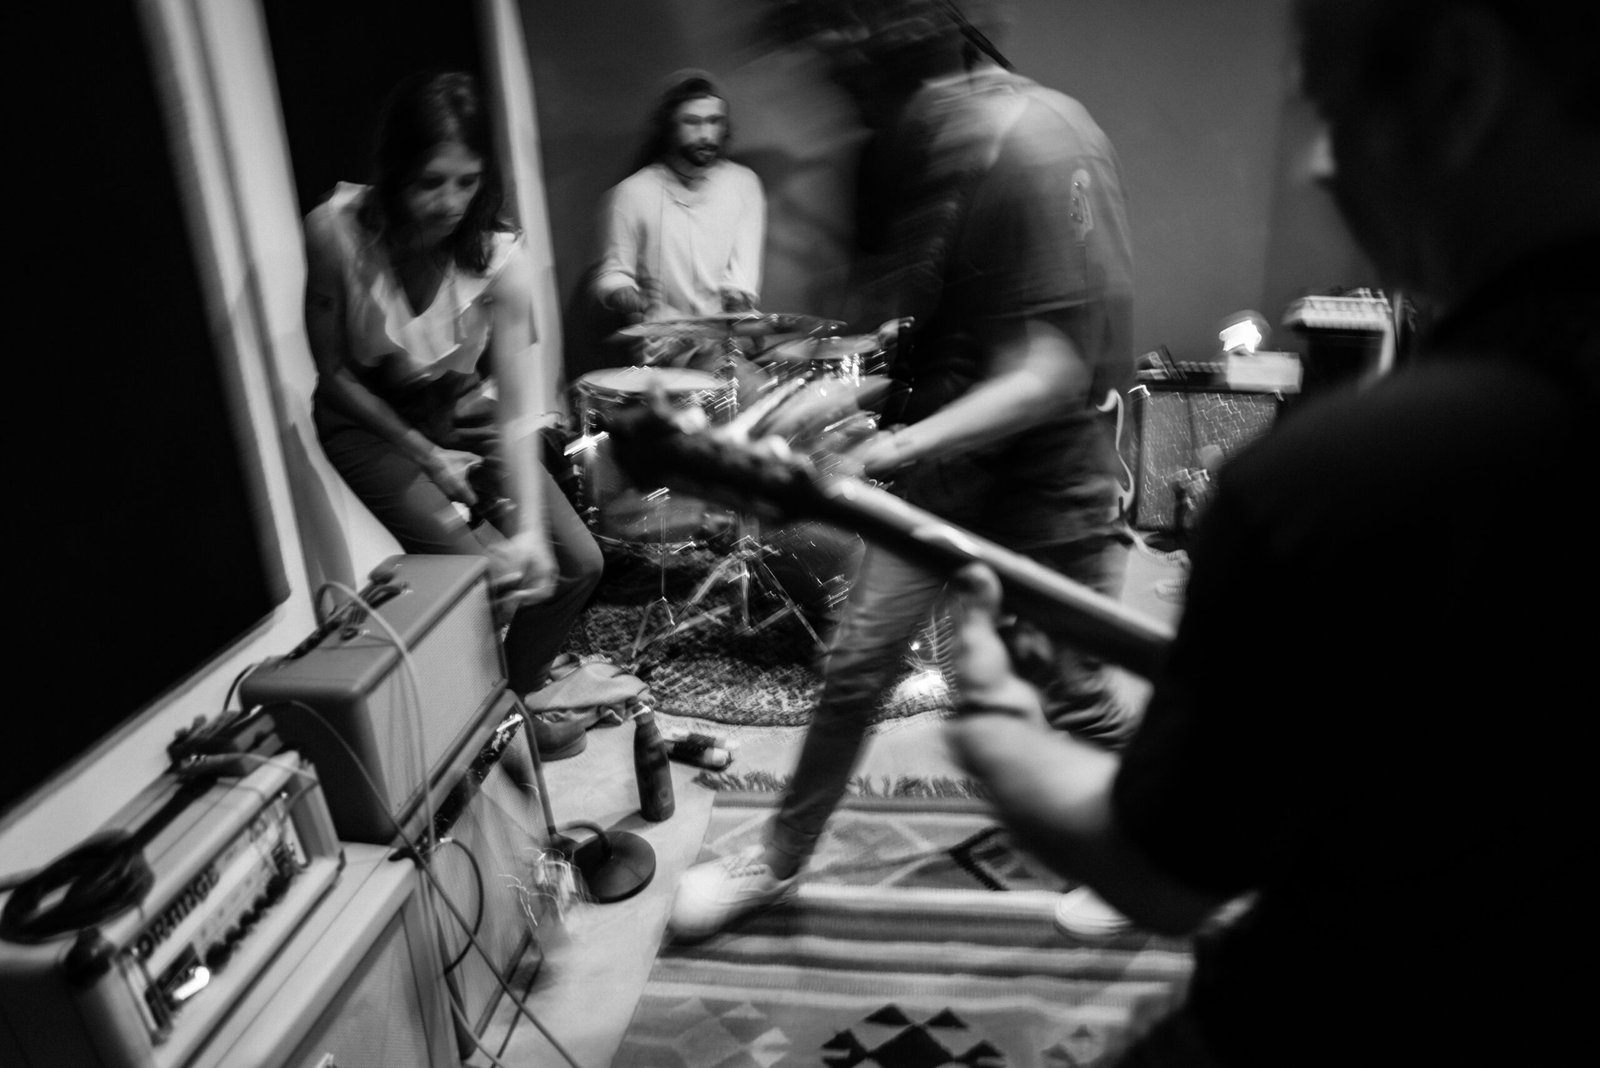 a group of people playing music in a room